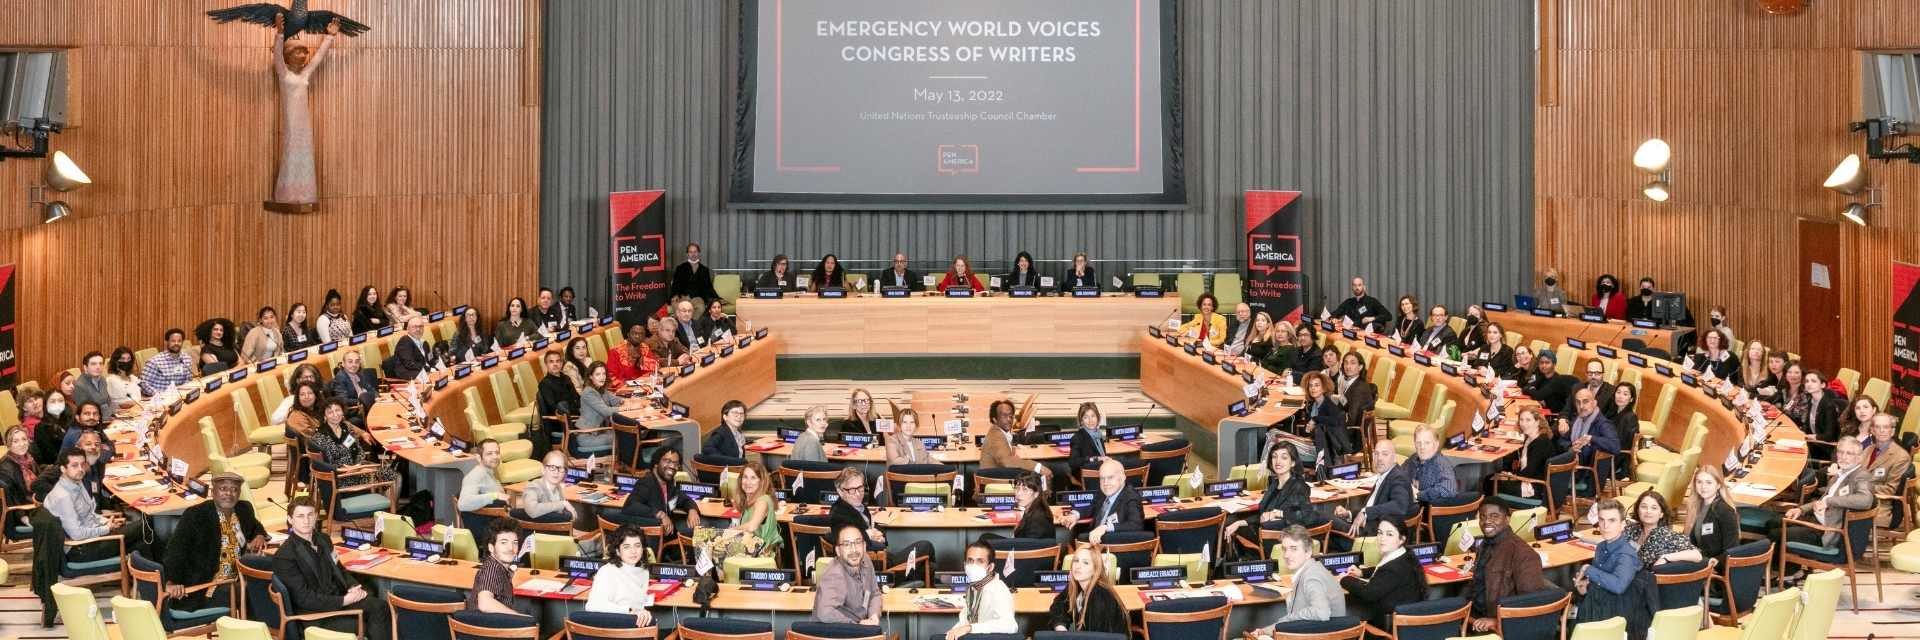 photo for the Emergency Writers Congress at the 2022 World Voices Festival